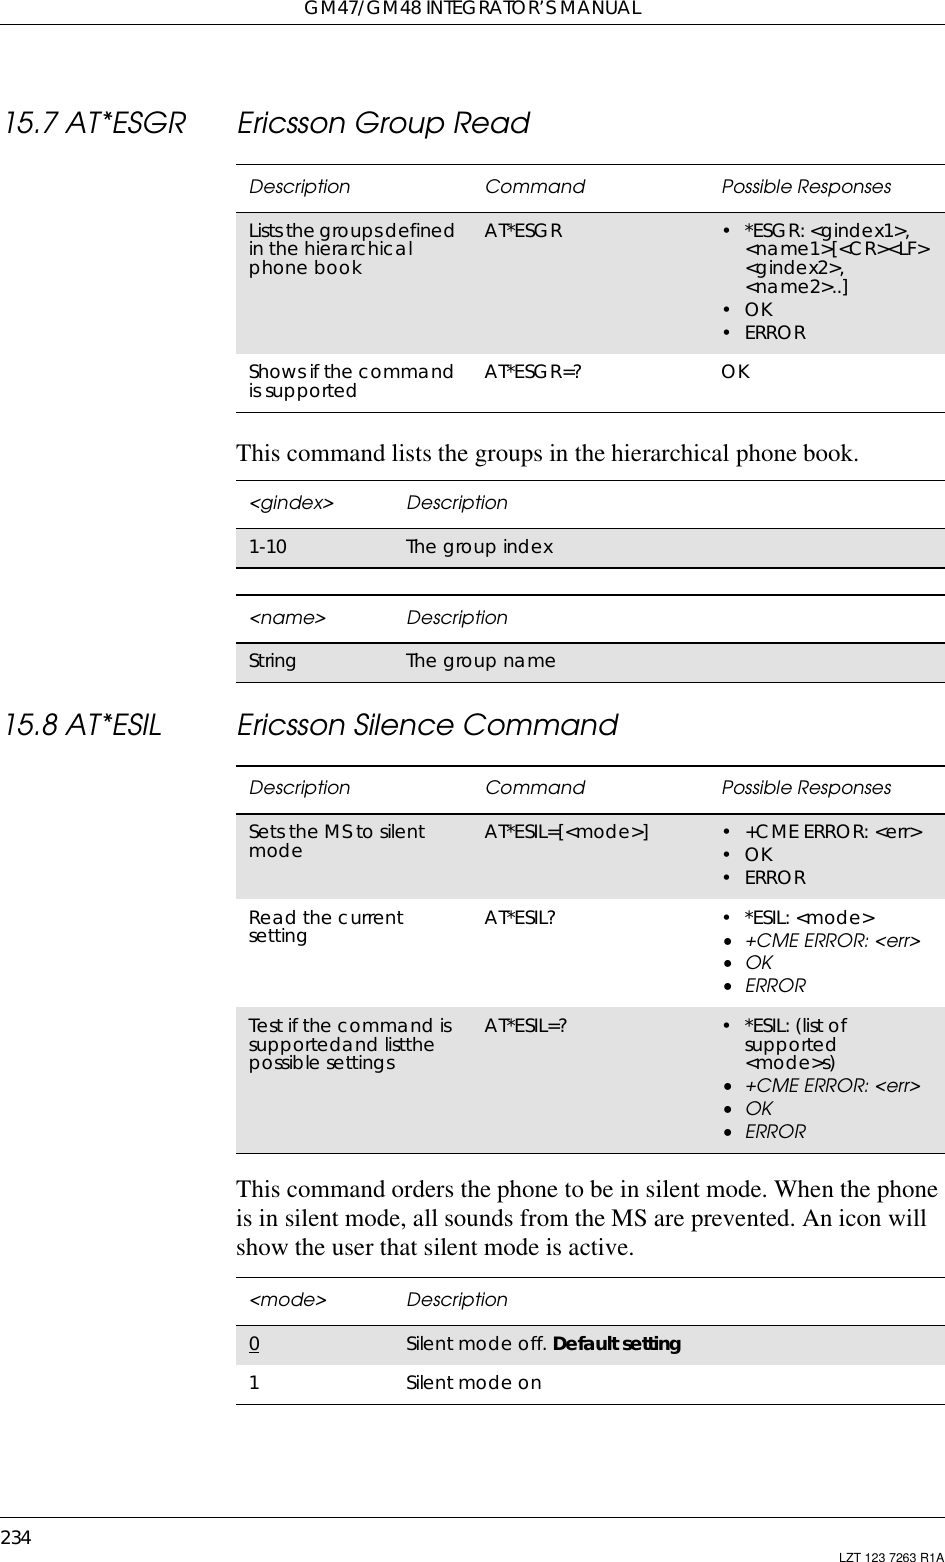 GM47/GM48 INTEGRATOR’S MANUAL234 LZT 123 7263 R1A15.7 AT*ESGR Ericsson Group ReadThis command lists the groups in the hierarchical phone book.15.8 AT*ESIL Ericsson Silence CommandThis command orders the phone to be in silent mode. When the phoneis in silent mode, all sounds from the MS are prevented. An icon willshow the user that silent mode is active.Description Command Possible ResponsesLists thegroupsdefinedin the hierarchicalphone bookAT*ESGR •*ESGR:&lt;gindex1&gt;,&lt;name1&gt;[&lt;CR&gt;&lt;LF&gt;&lt;gindex2&gt;,&lt;name2&gt;..]•OK•ERRORShows if the commandis supported AT*ESGR=? OK&lt;gindex&gt; Description1-10 The group index&lt;name&gt; DescriptionString The group nameDescription Command Possible ResponsesSets the MS to silentmode AT*ESIL=[&lt;mode&gt;] •+CMEERROR:&lt;err&gt;•OK•ERRORRead the currentsetting AT*ESIL? •*ESIL:&lt;mode&gt;•+CMEERROR:&lt;err&gt;•OK•ERRORTest if the command issupportedand listthepossible settingsAT*ESIL=? •*ESIL:(listofsupported&lt;mode&gt;s)•+CMEERROR:&lt;err&gt;•OK•ERROR&lt;mode&gt; Description0Silent mode off. Default setting1Silent mode on